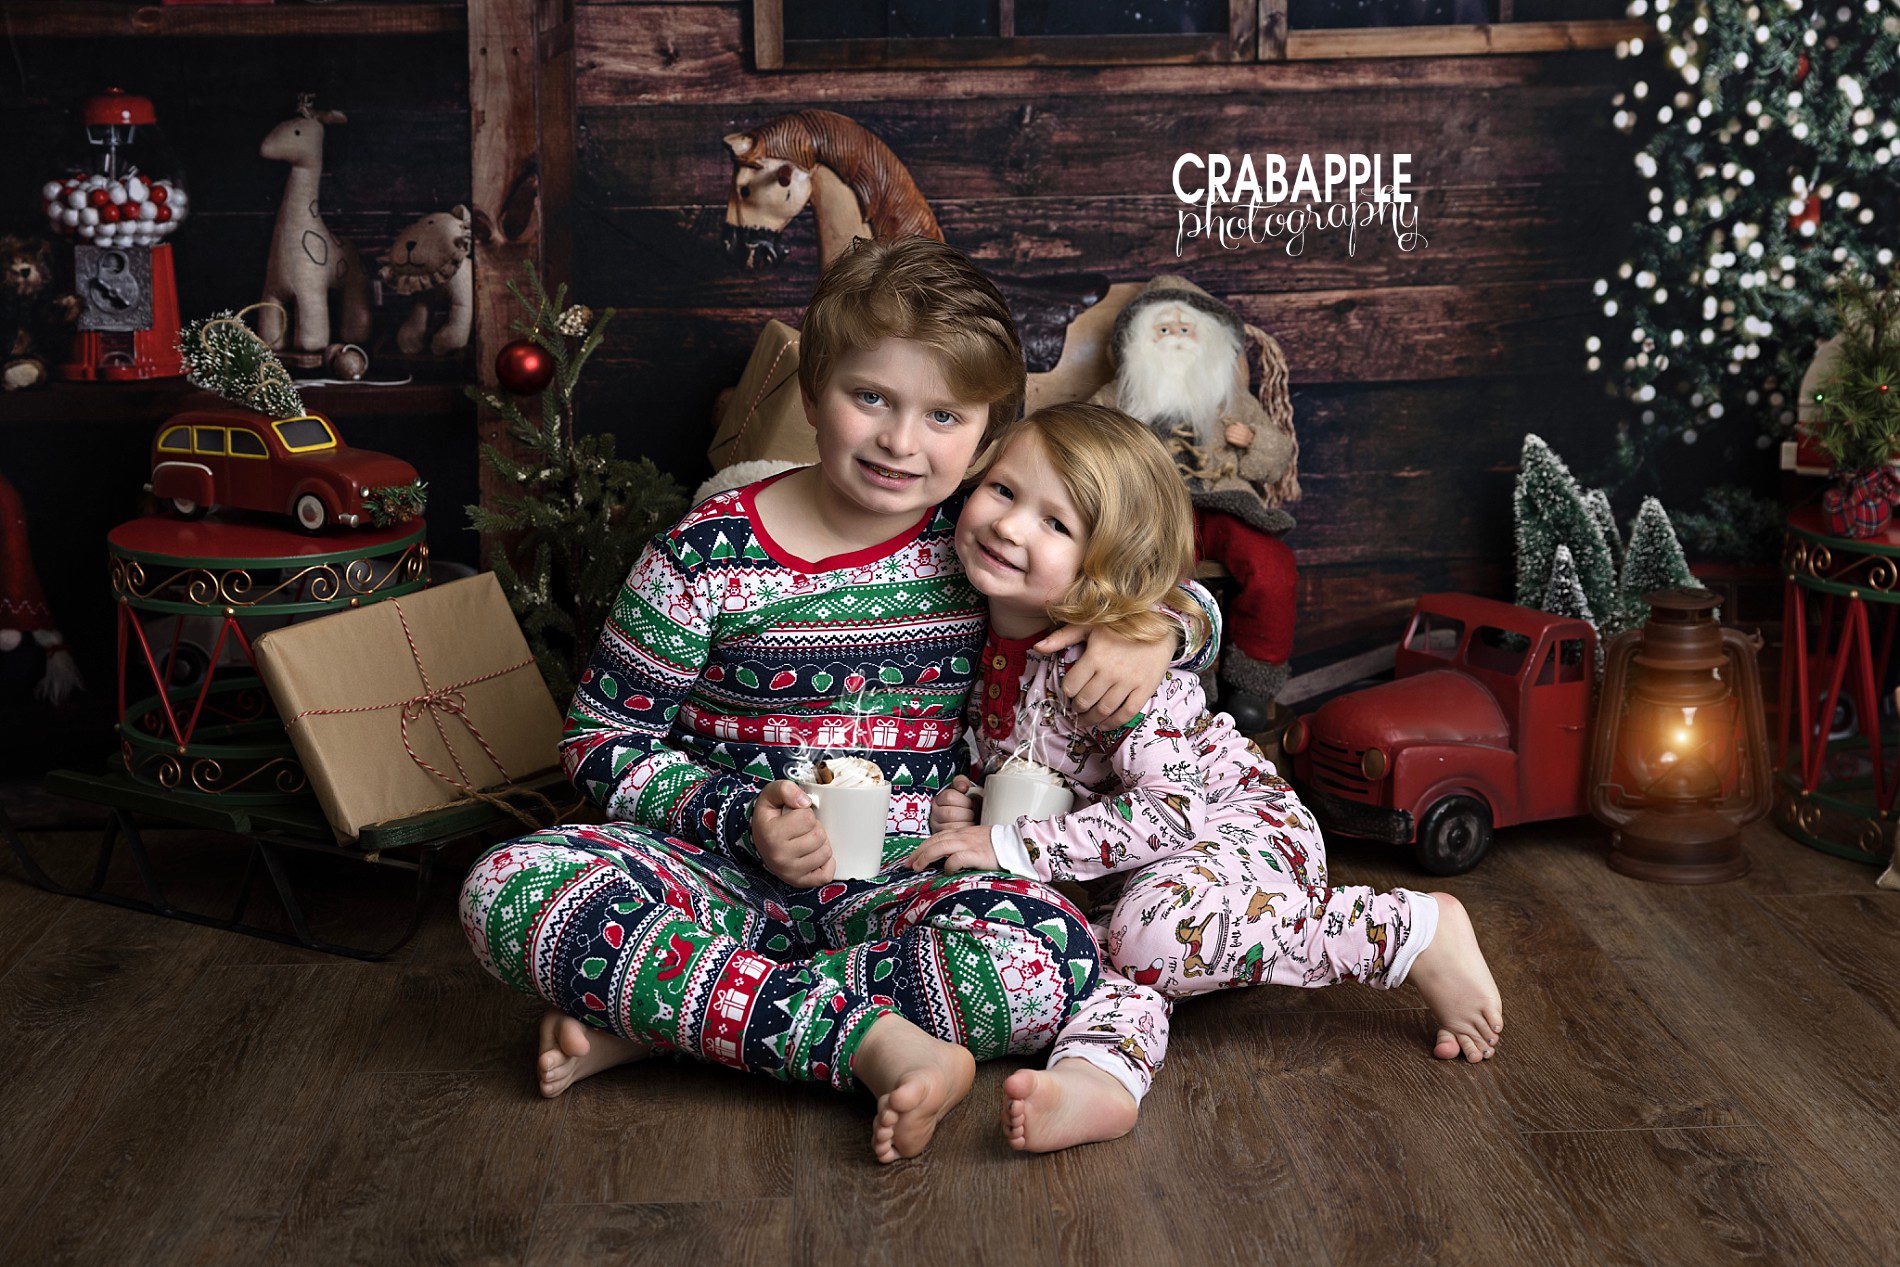 sibling photo ideas for christmas